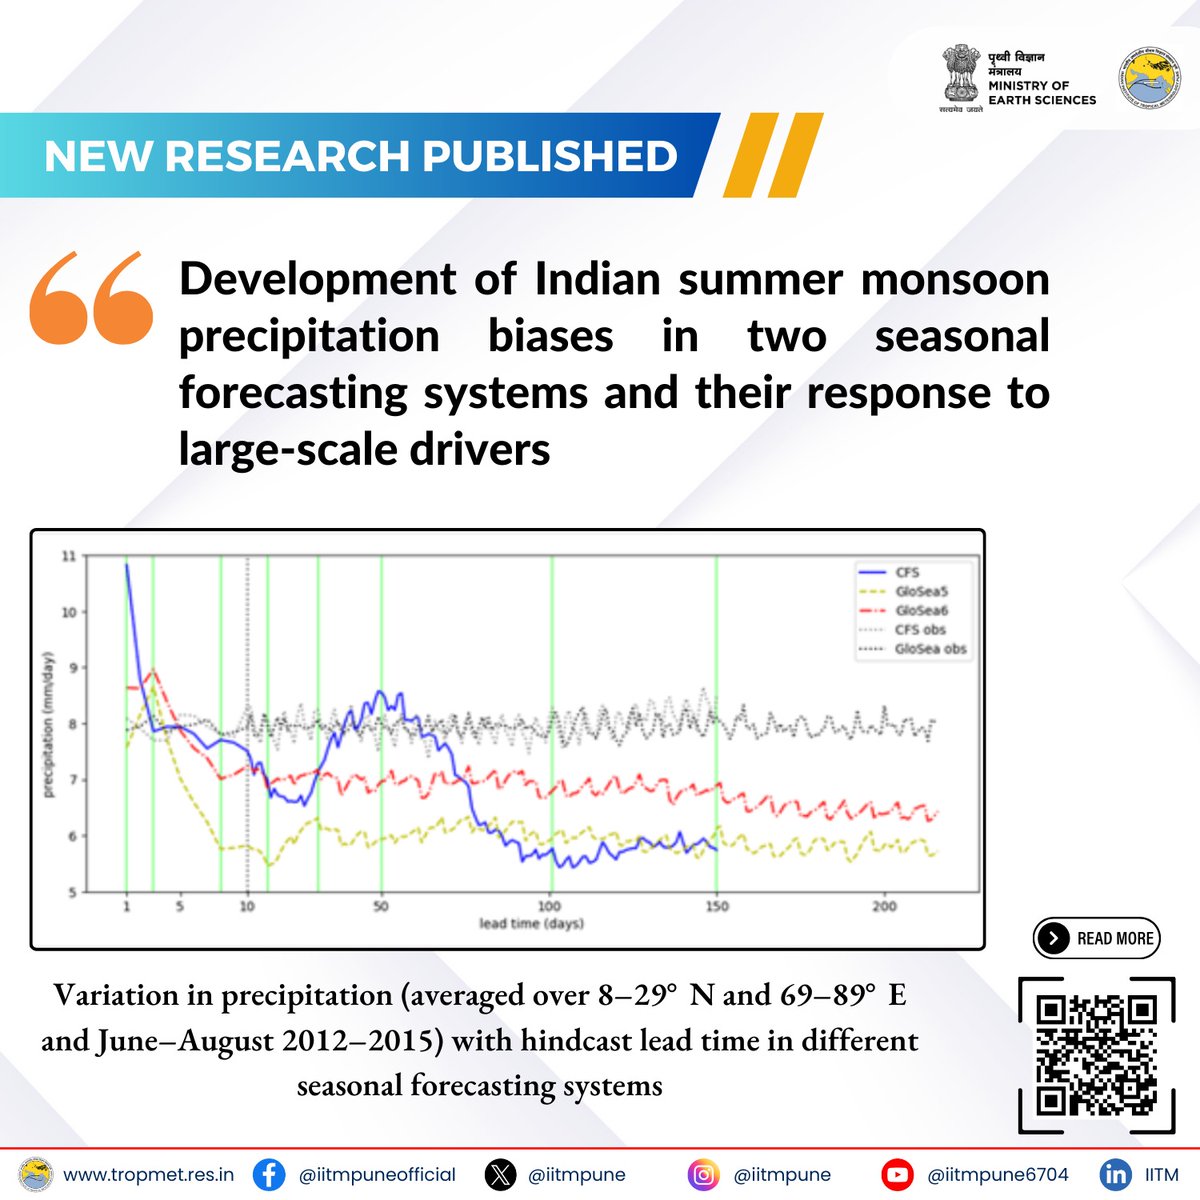 A new research exploring Indian monsoon precipitation biases from weather to climate scales has been published in the European Geosciences Union under a collaborative initiative between the Met Office, UK academic partners & @moesgoi @iitmpune @ankur__s. wcd.copernicus.org/articles/5/671…